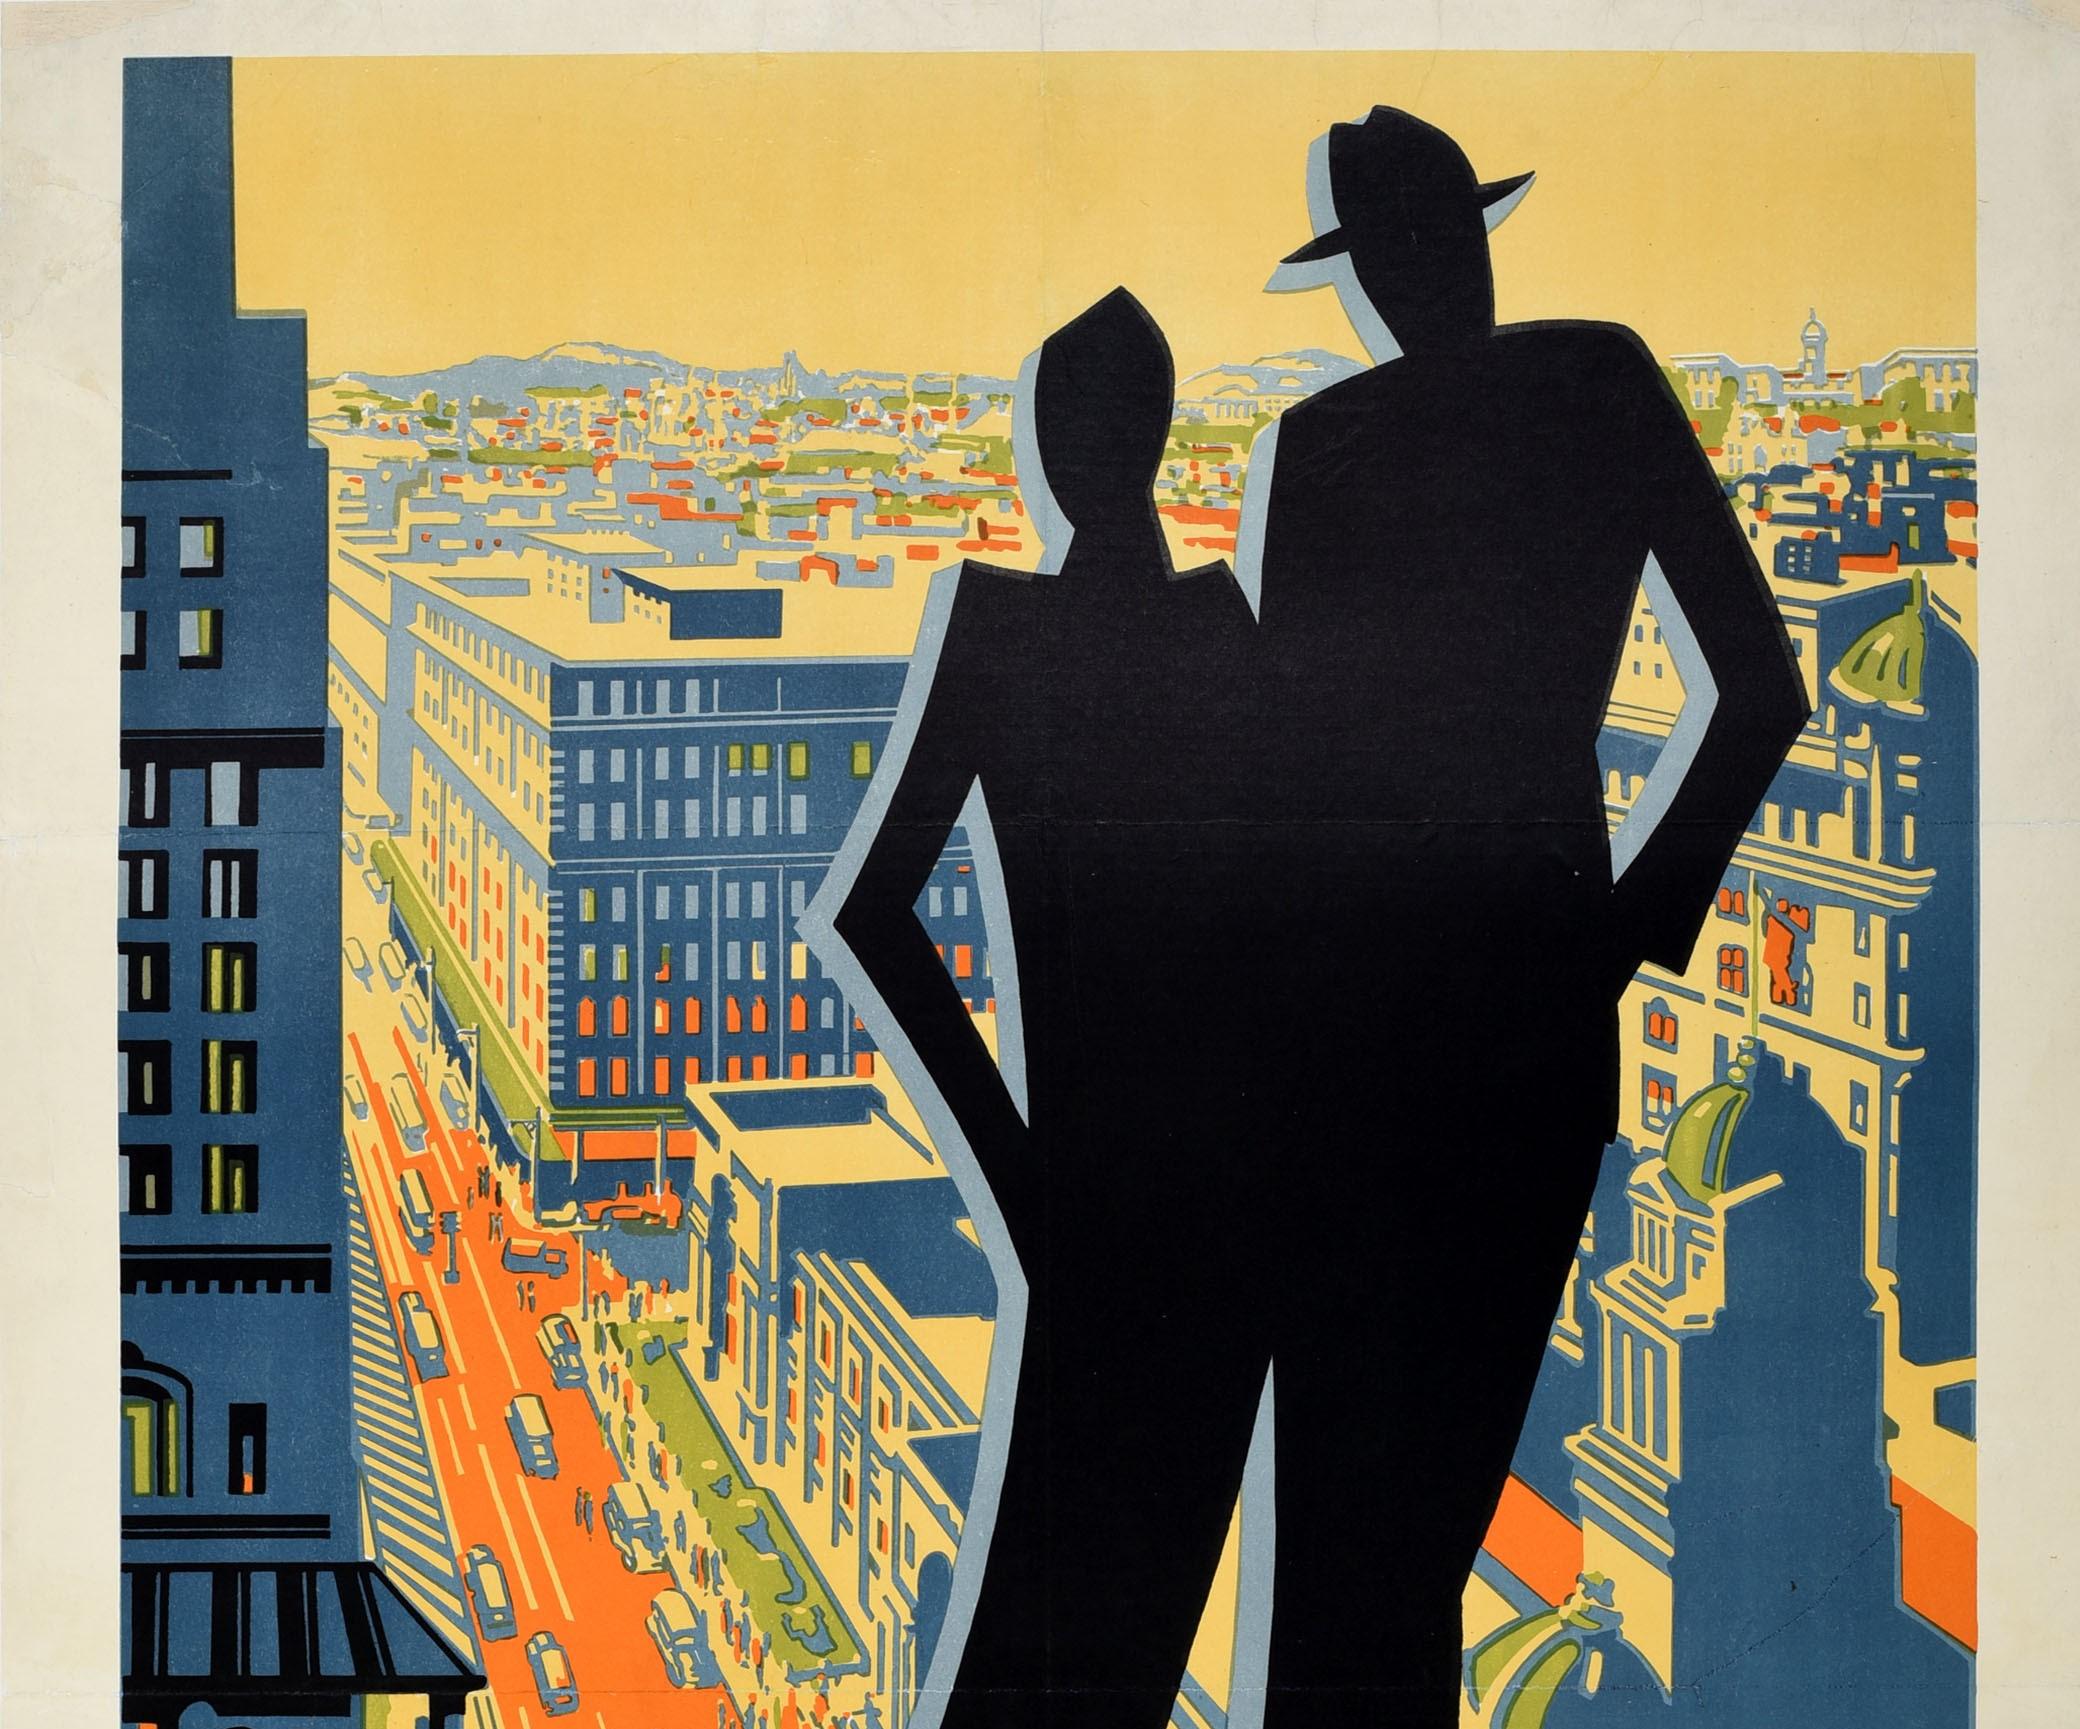 Original vintage travel poster for Johannesburg the Metropolis of South Africa featuring a stunning Art Deco design depicting the stylised silhouette of a couple looking out at the view over the city with hills visible in the distance, the bold text